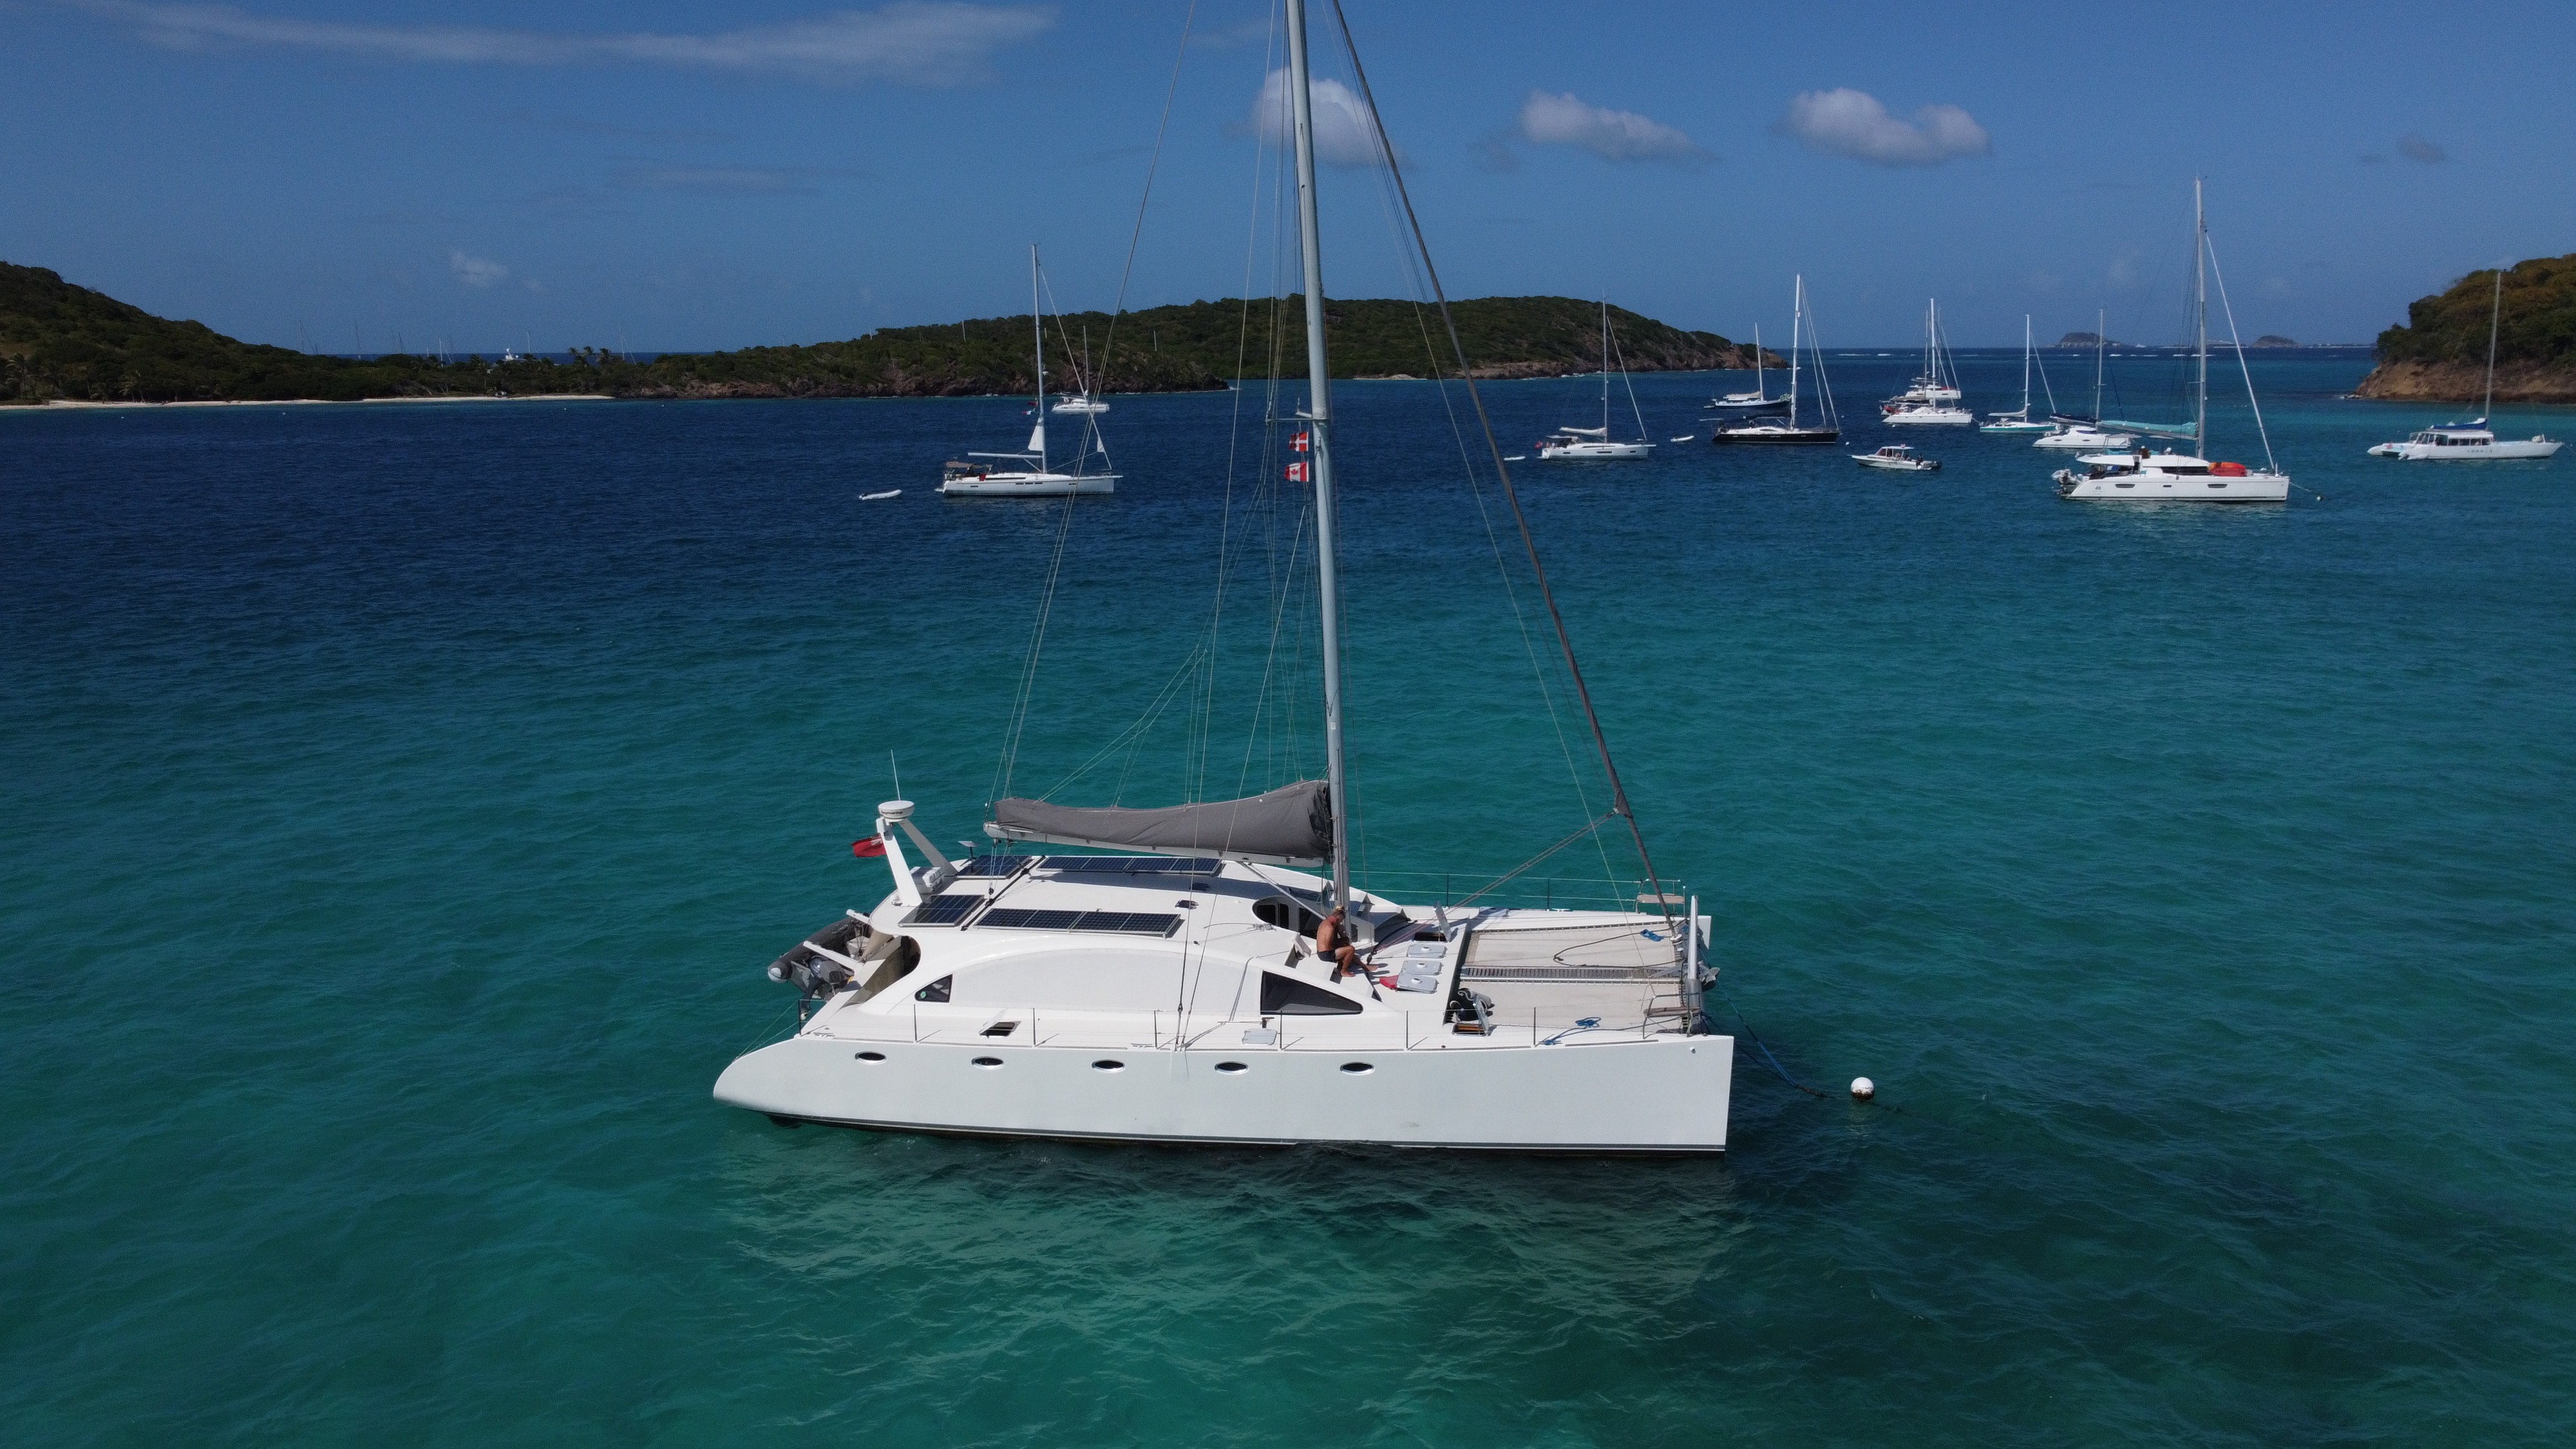 Used Sail Catamaran for Sale 2013 DH 550 Boat Highlights